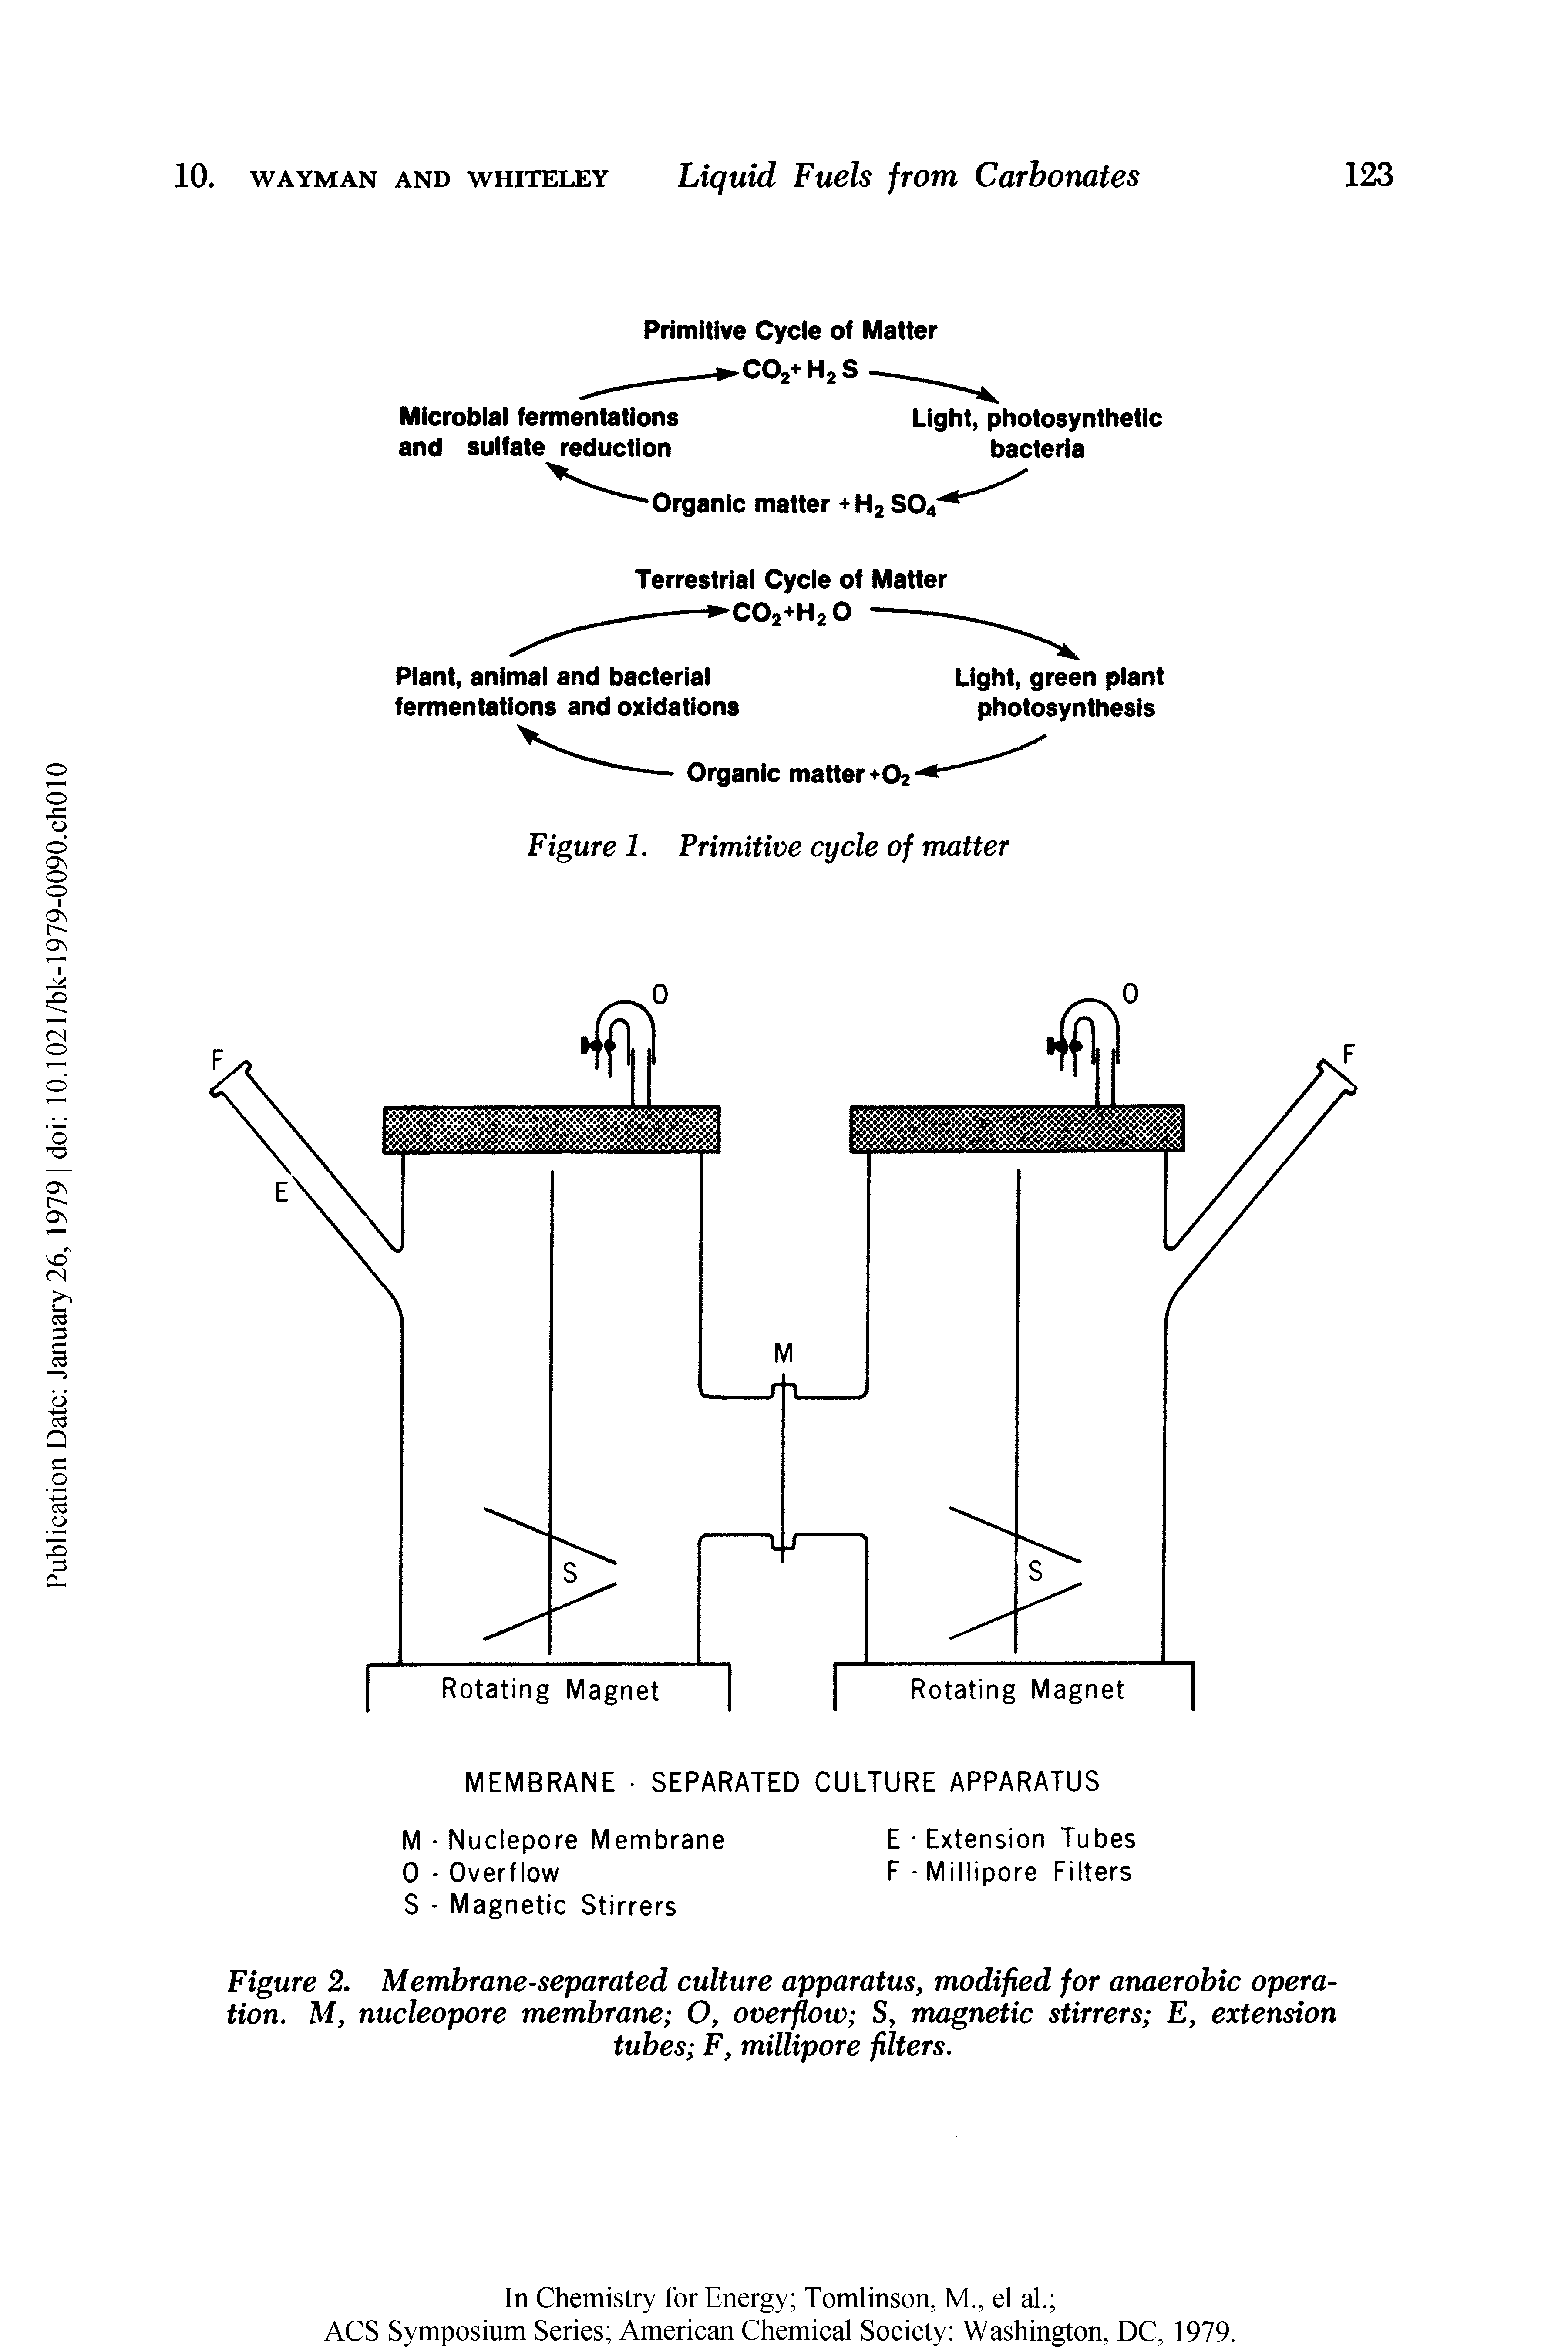 Figure 2. Membrane-separated culture apparatus, modified for anaerobic operation, M, nucleopore membrane O, overflow S, magnetic stirrers E, extension tubes F, millipore filters.